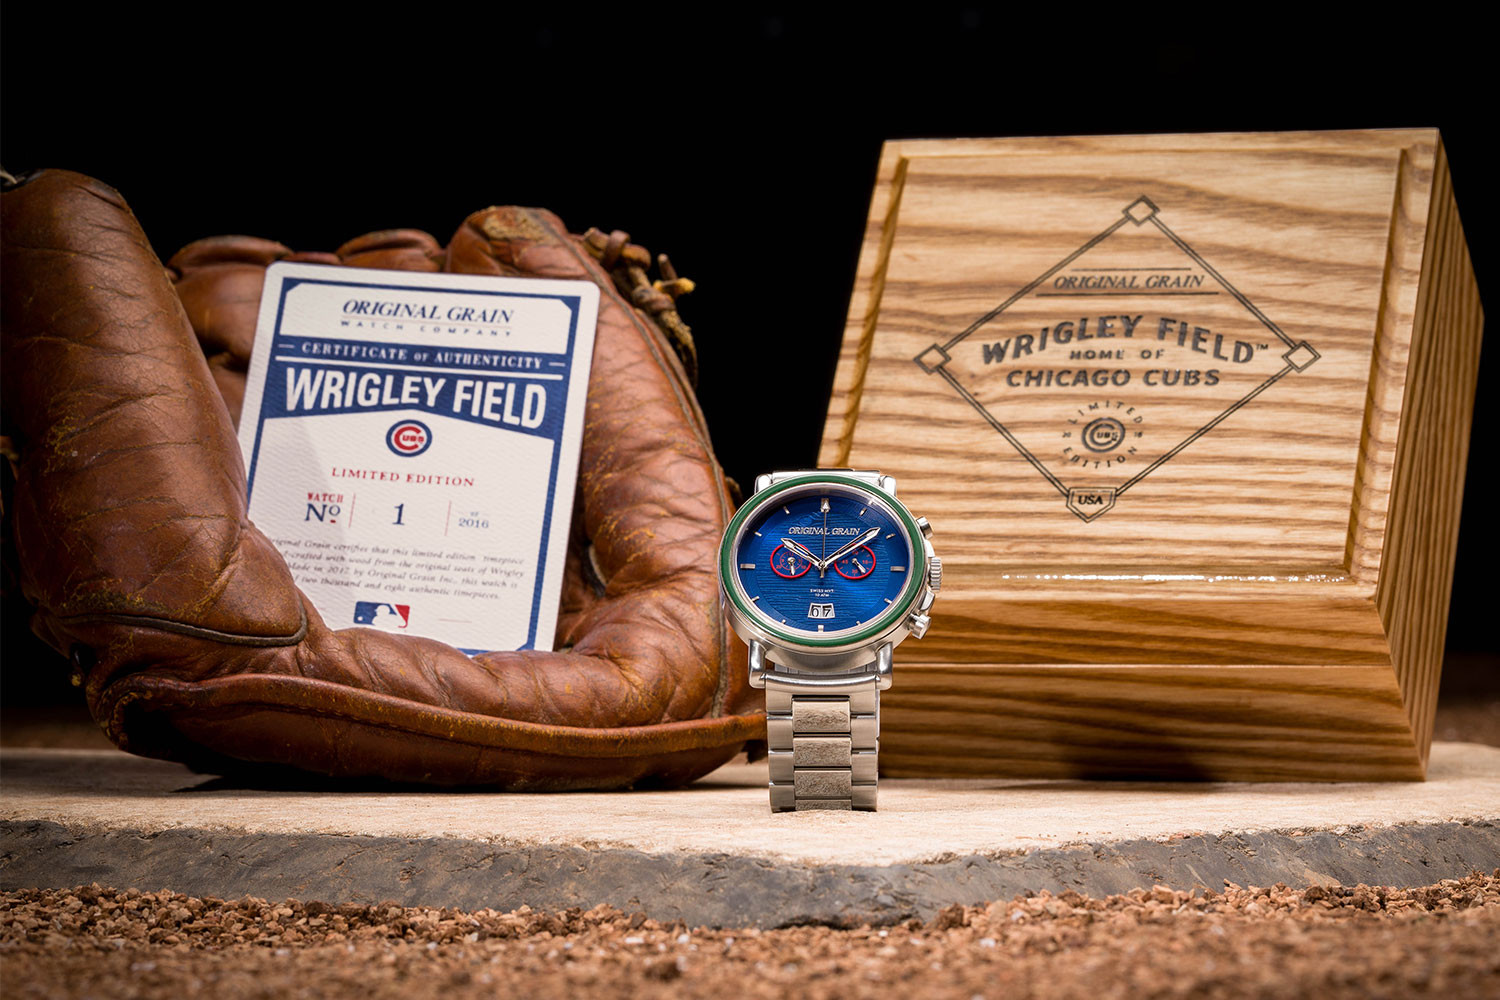 Wrigley Field Chrono watch with collectible box and baseball glove